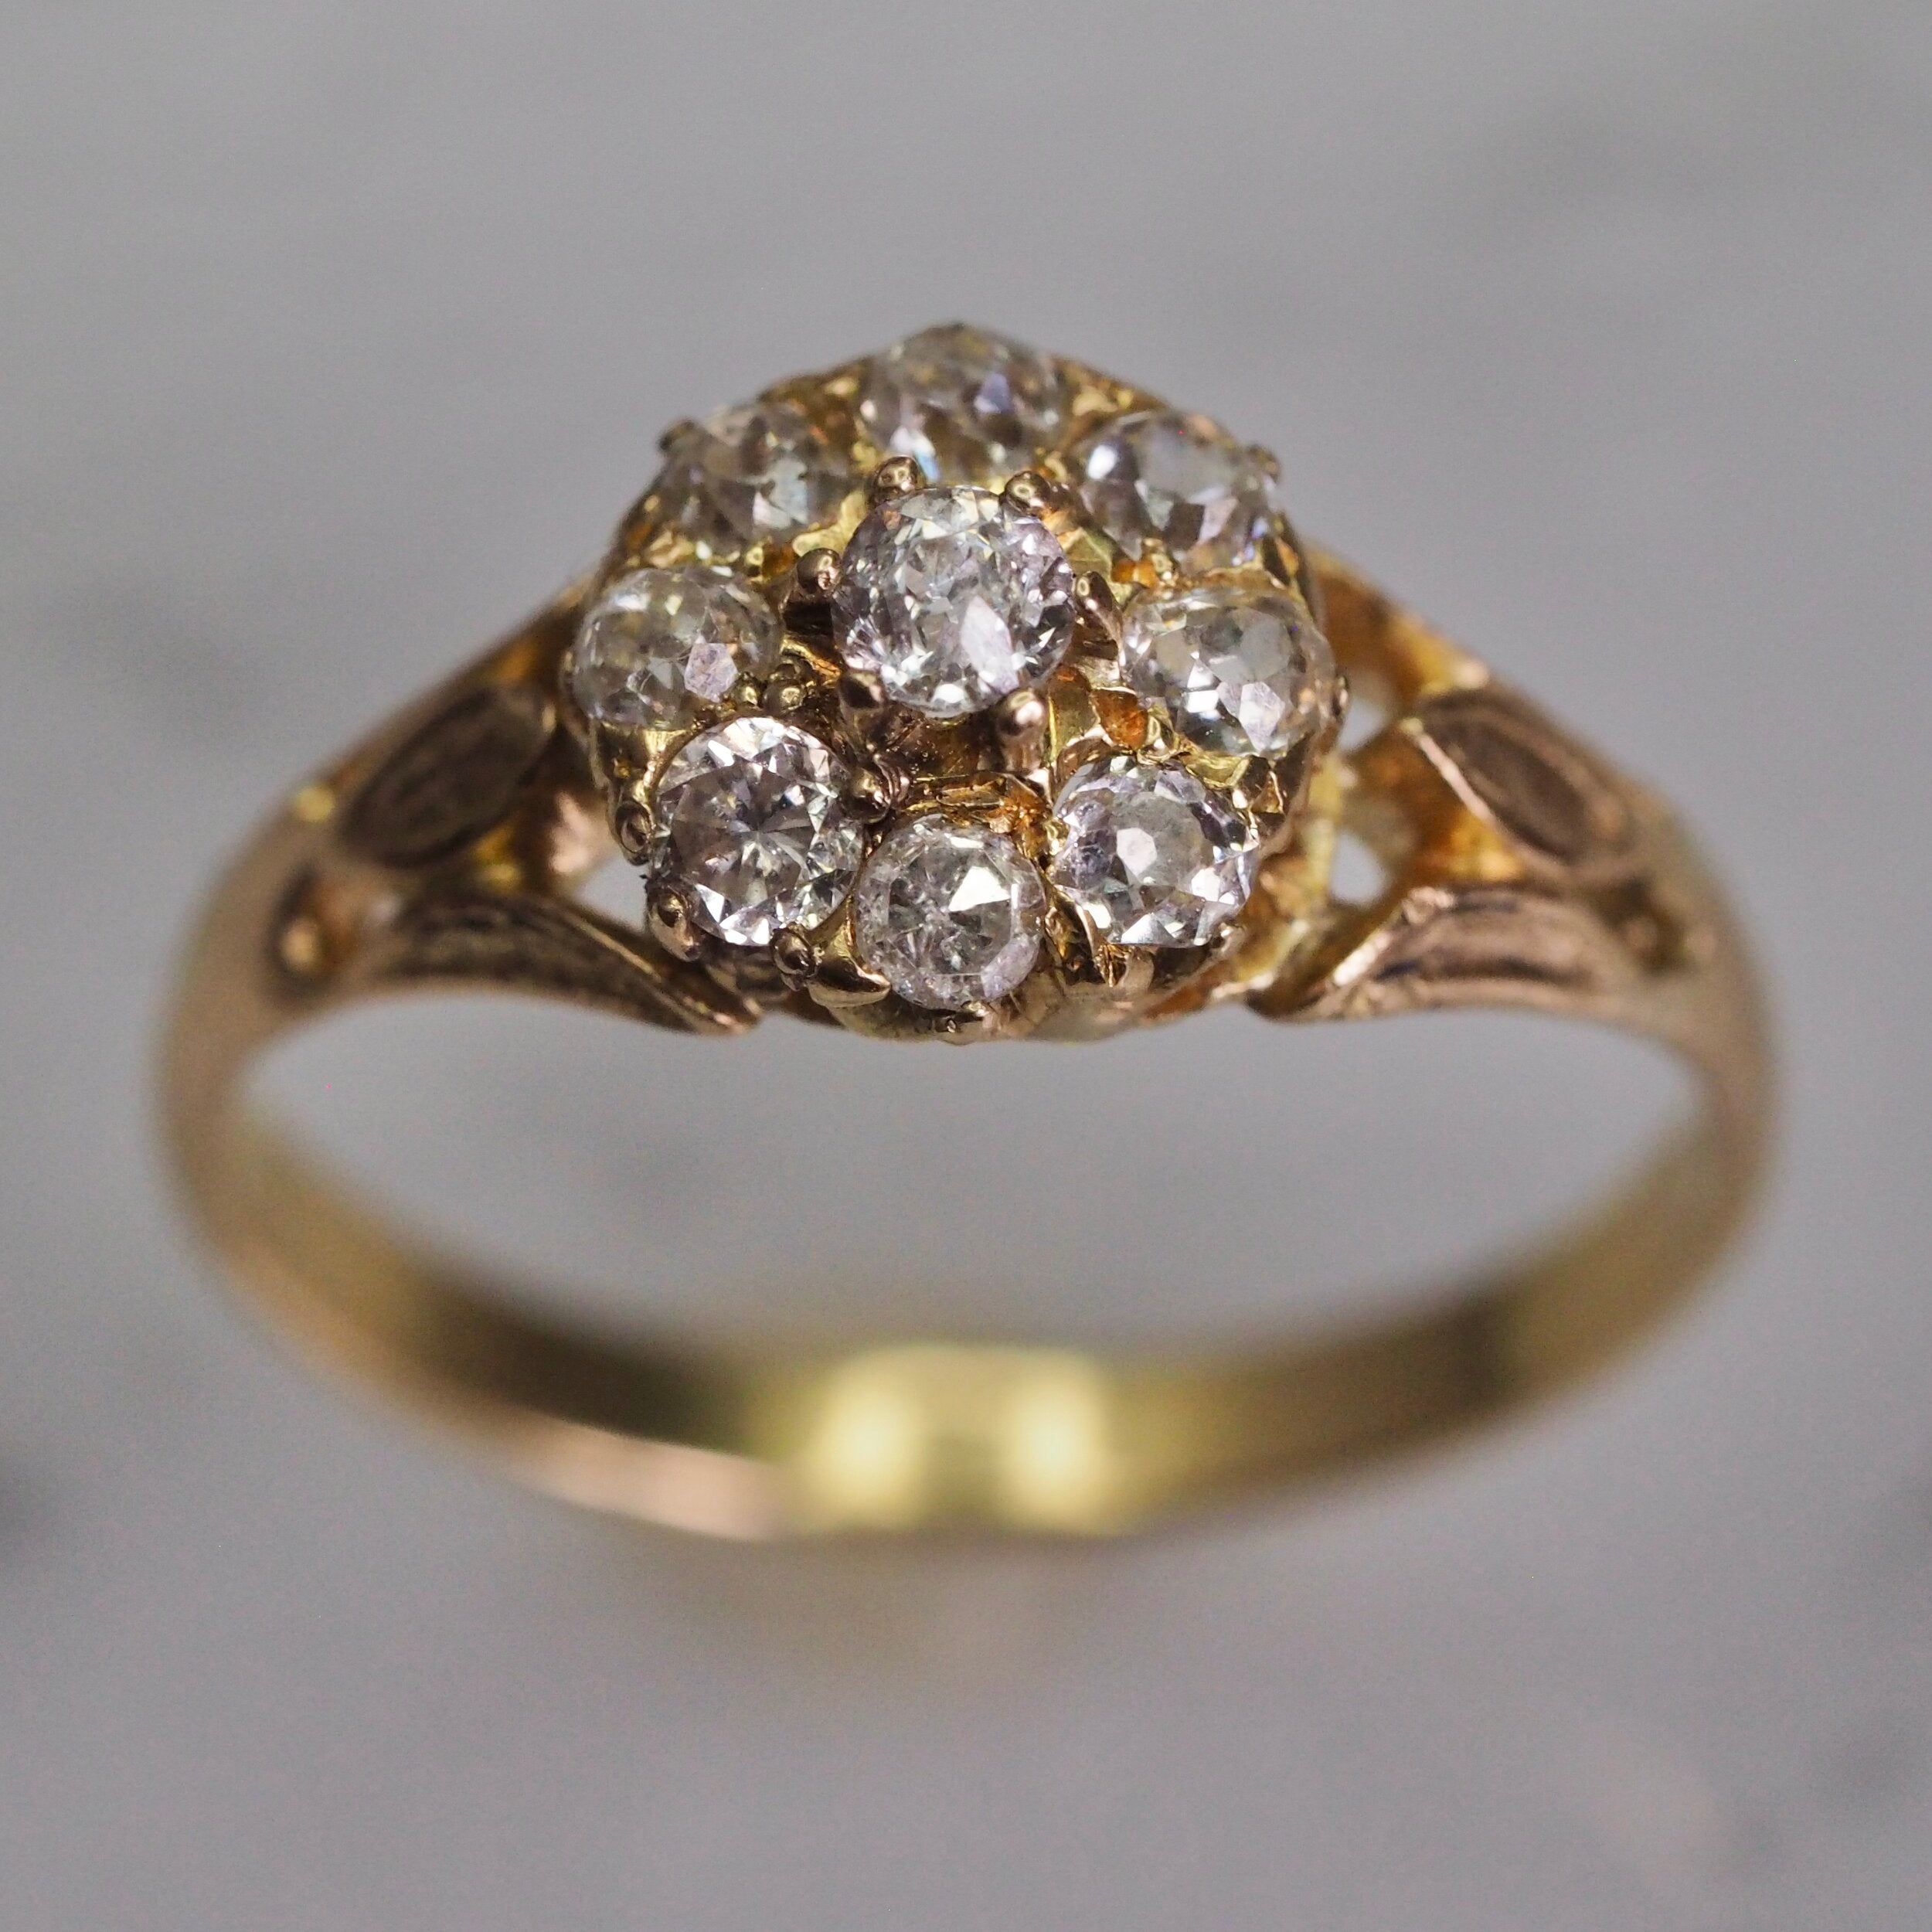 Antique Early Victorian c. 1840 15k Gold Old Mine Cut Diamond Cluster Ring